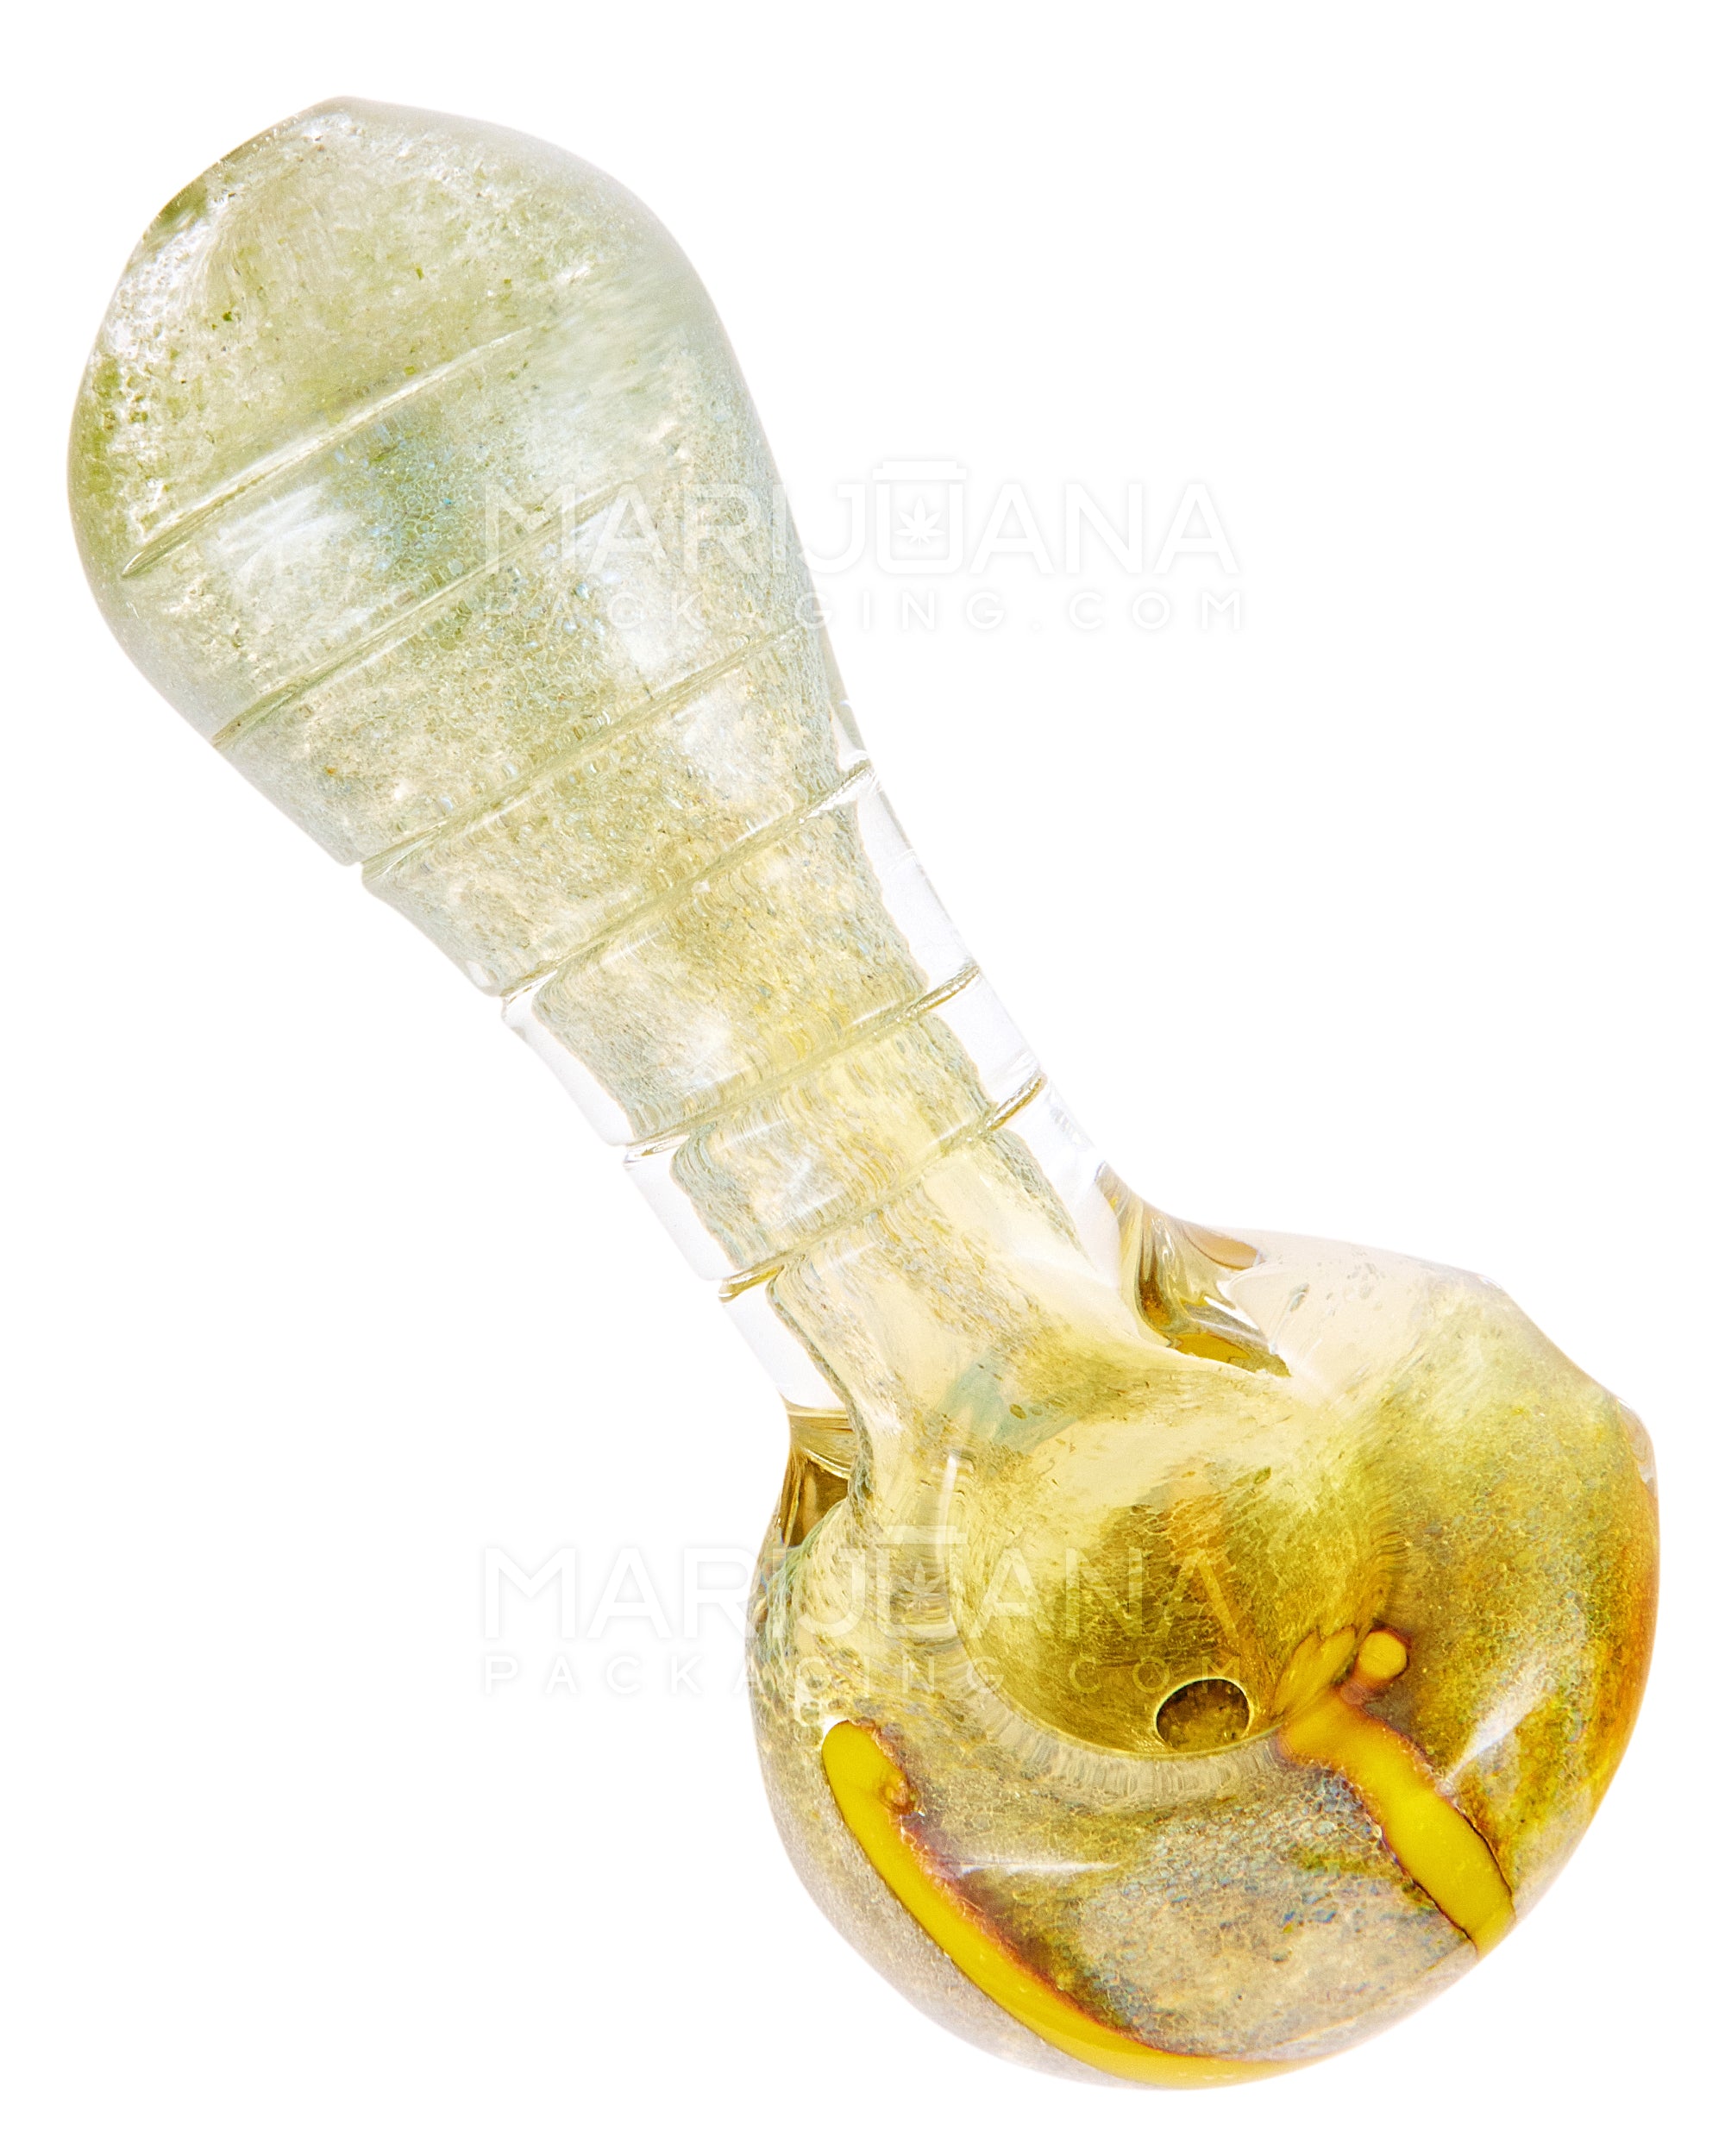 Frit & Gold Fumed Ridged Spoon Hand Pipe w/ Stripes | 3.5in Long - Glass - Assorted - 6